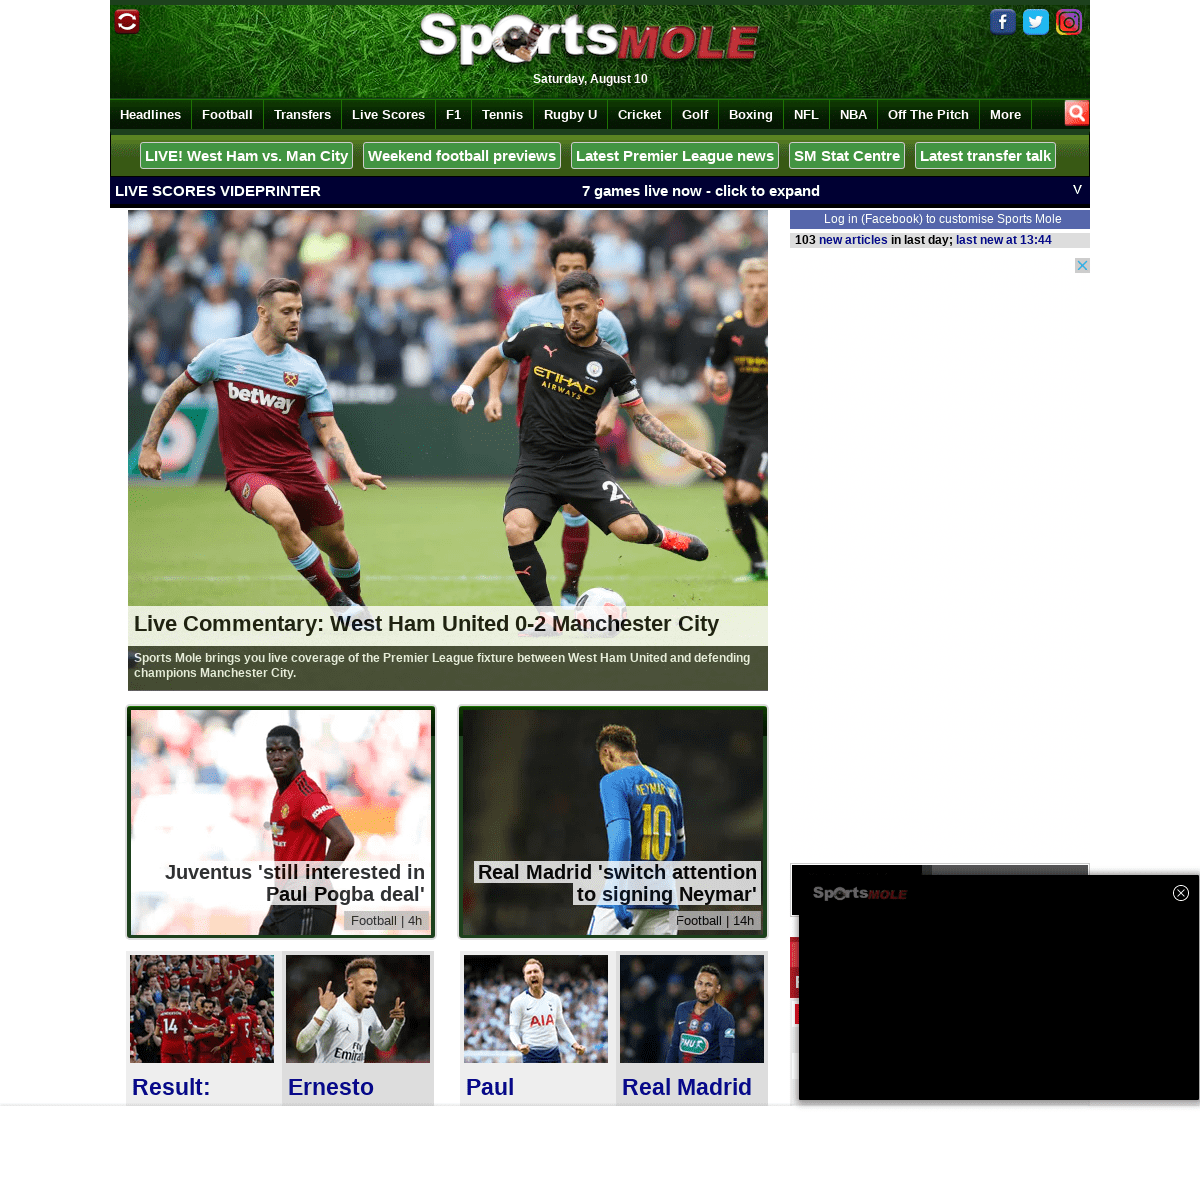 Sports Mole - Football, tennis, rugby, cricket, boxing, transfer news, rumours and gossip